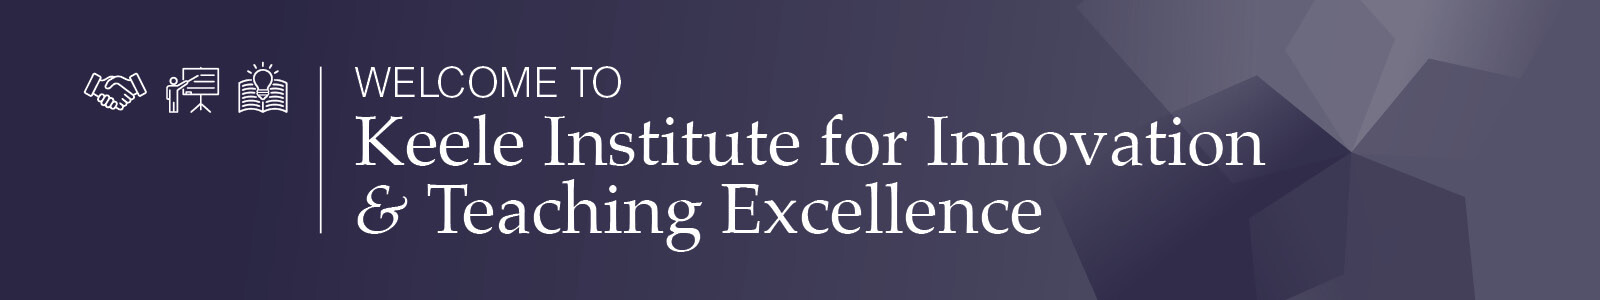 Keele Institute for Innovation and Teaching Excellence